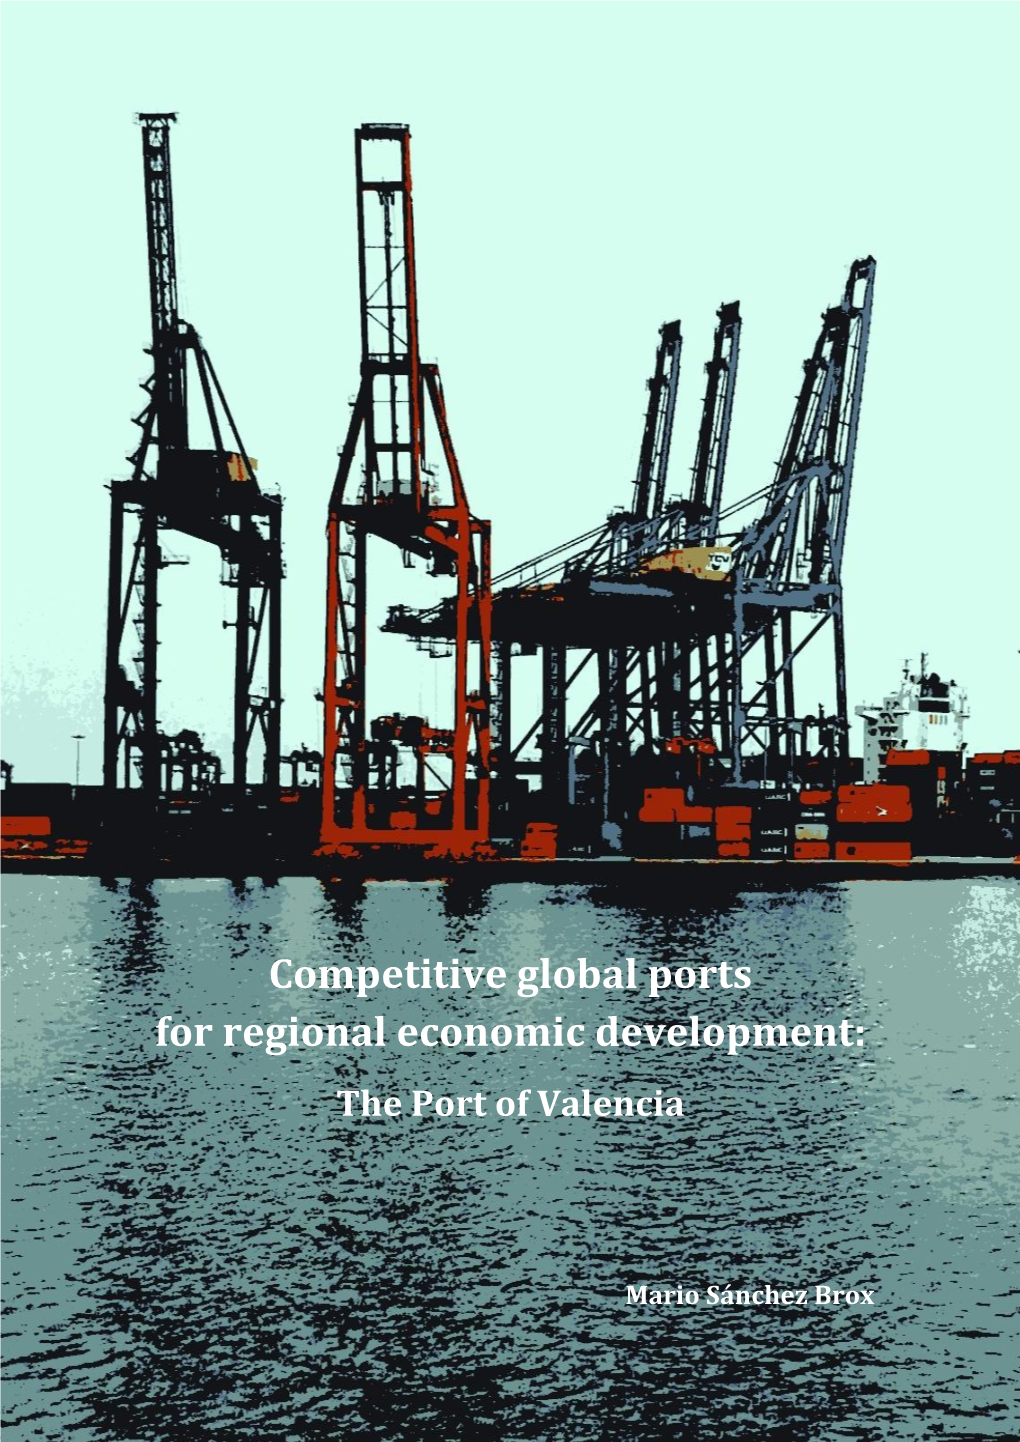 Attractiveness of the Port of Valencia for Global Shipping Companies